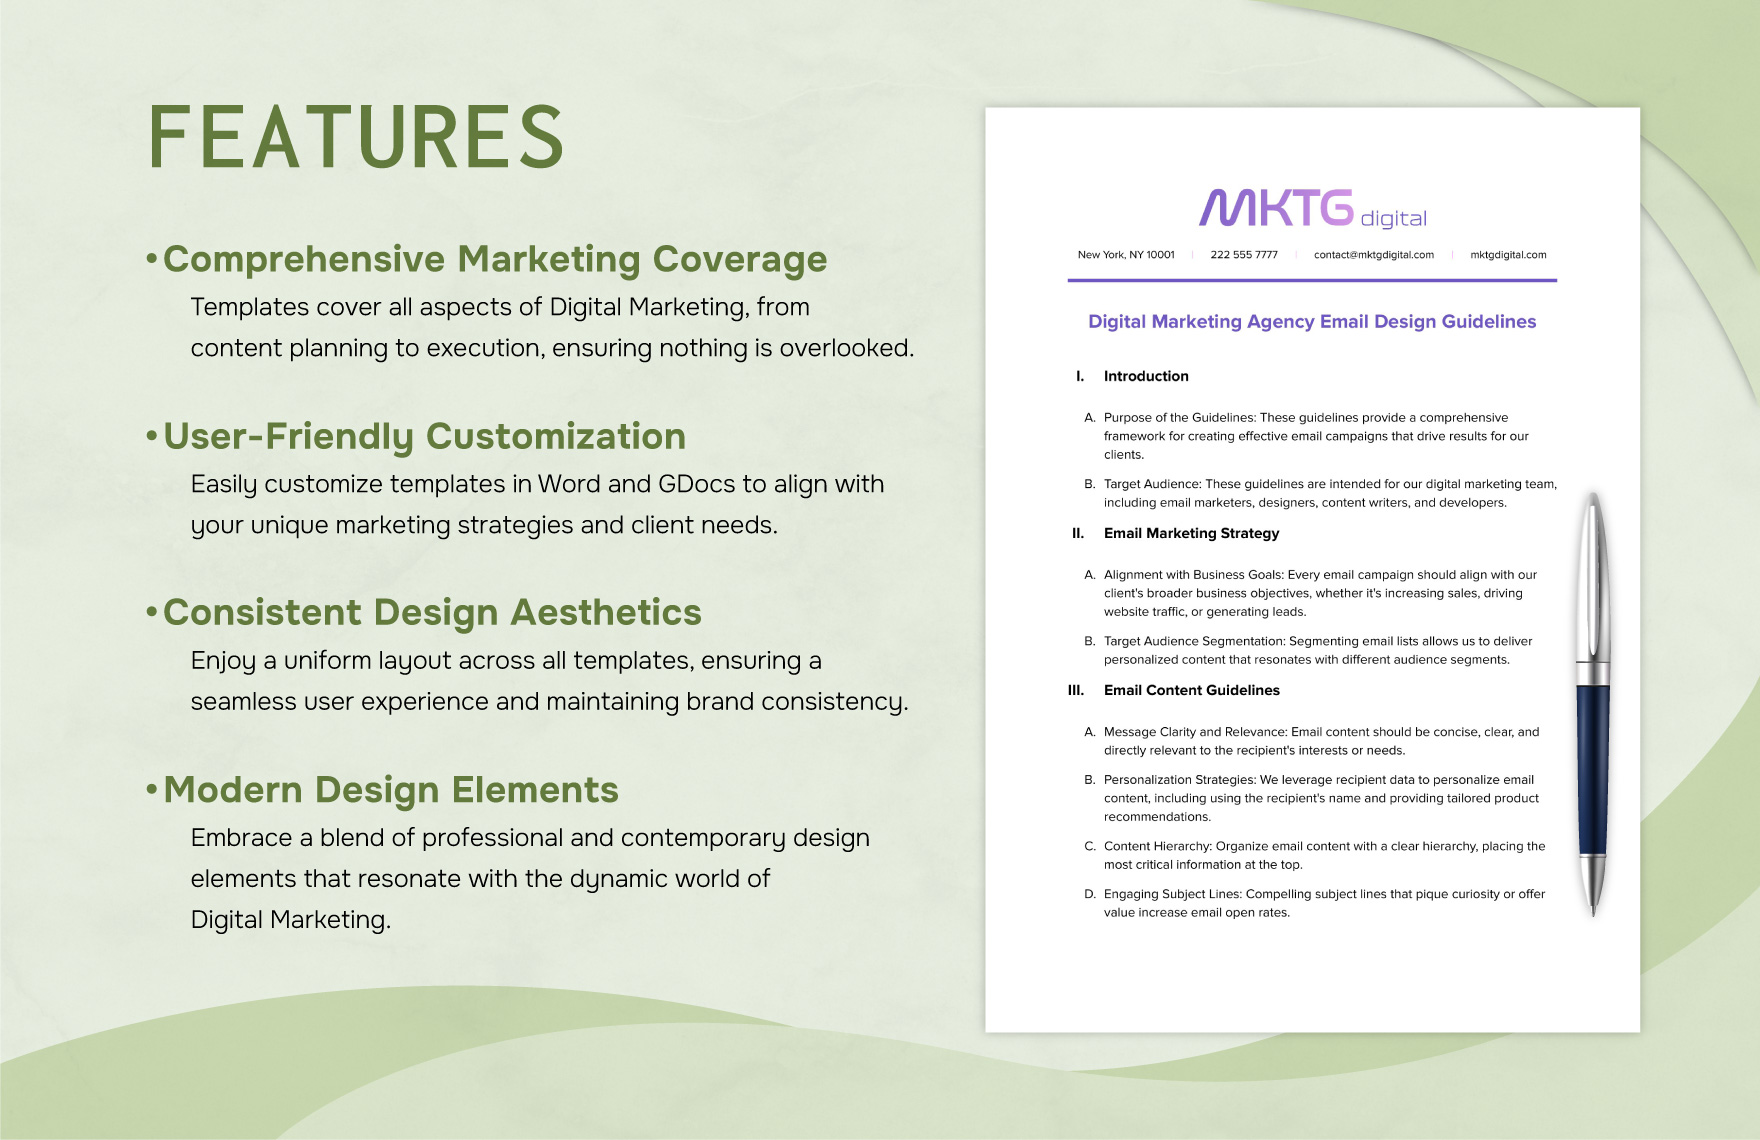 Digital Marketing Agency Email Design Guidelines Template